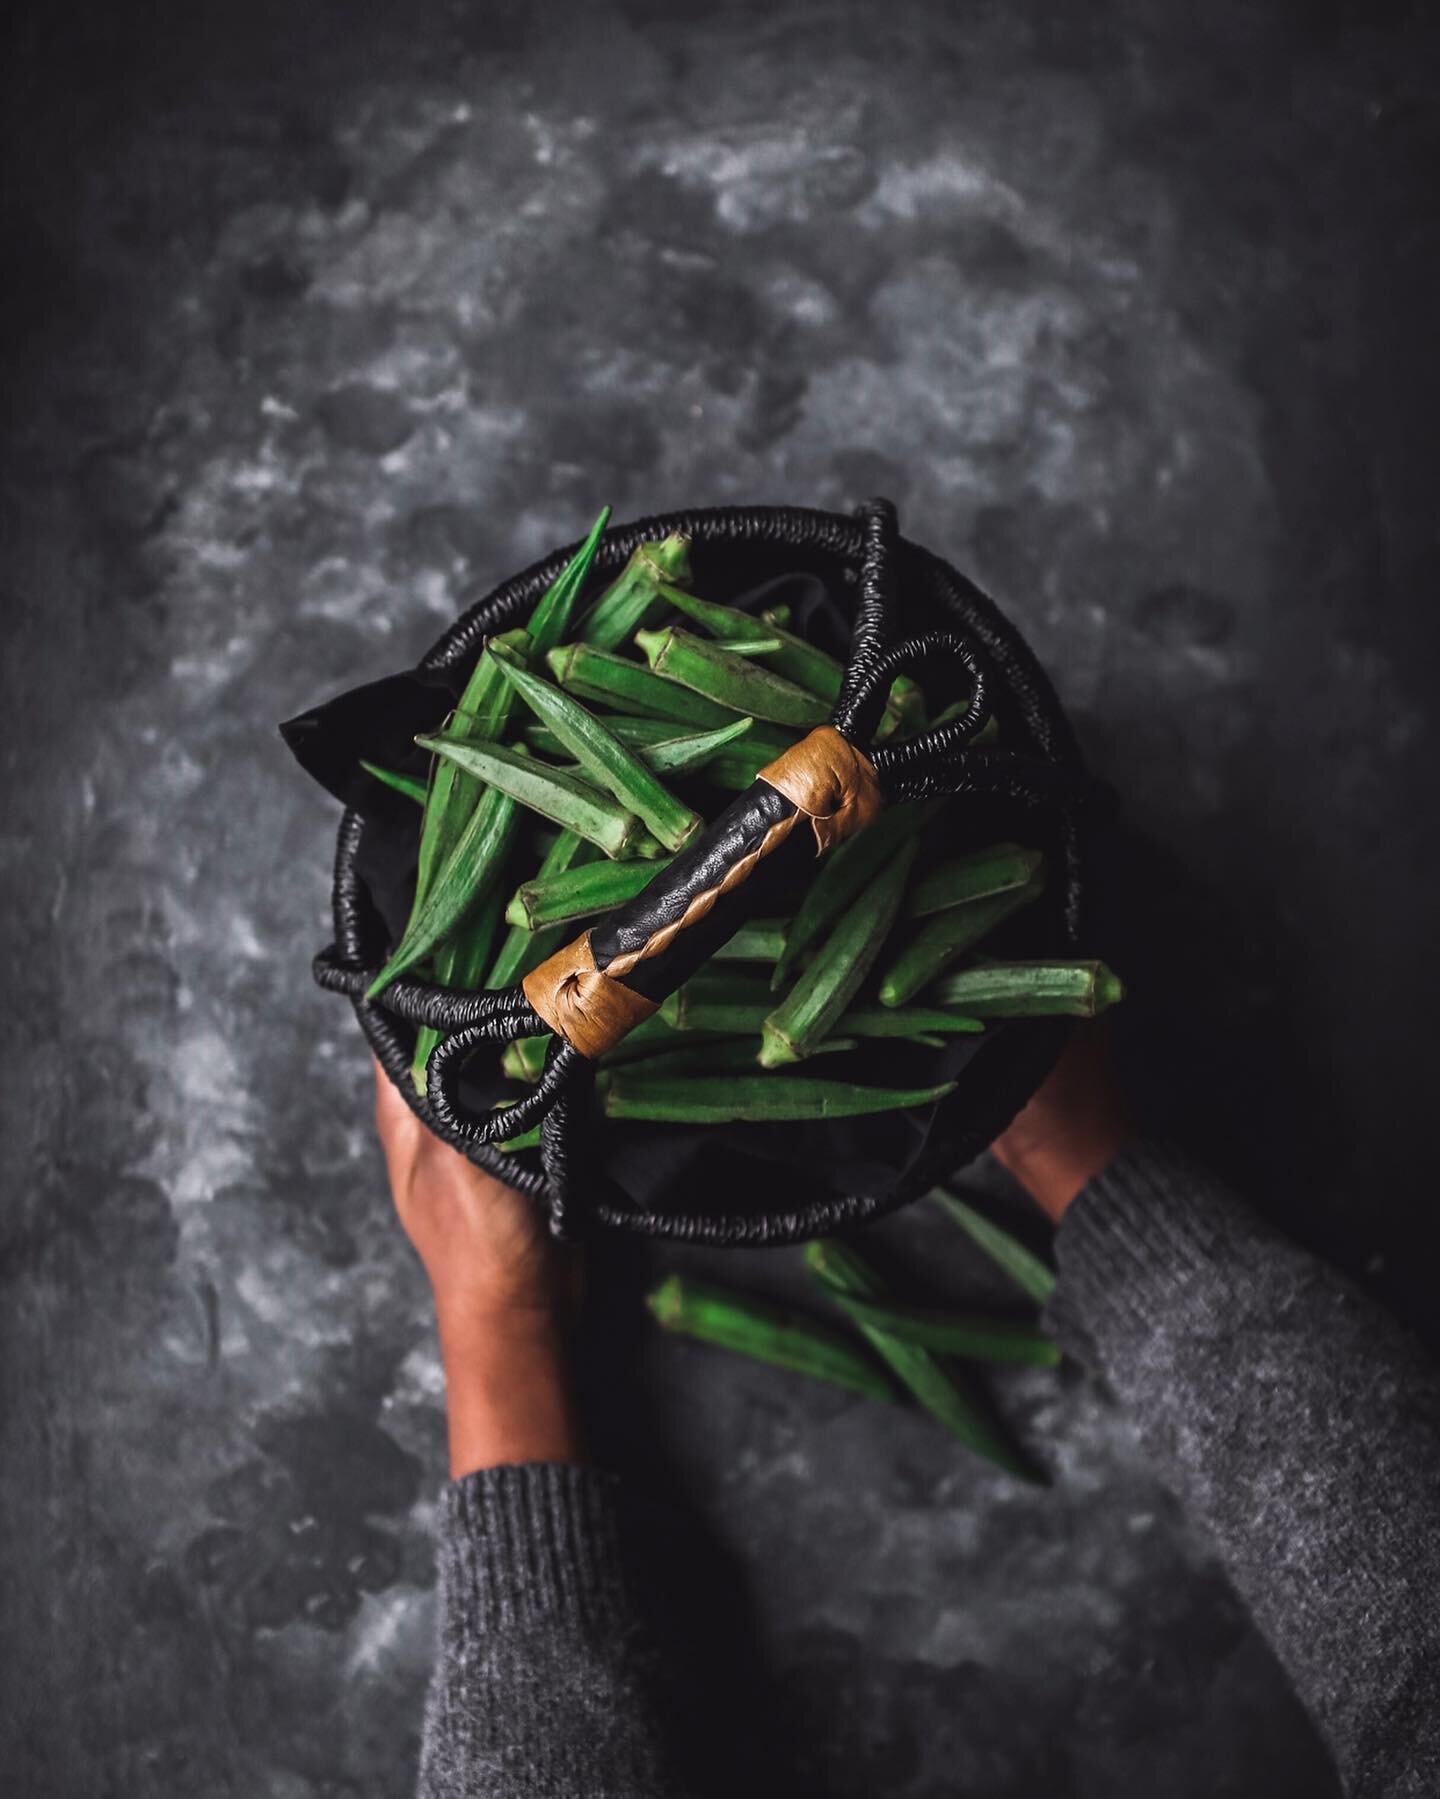 Today&rsquo;s #eatcaptureshare is all about okra, green peppers and green beans. Personally I love green foods and shooting them. Honestly though shooting Okra can be challenging at times. 
💚
In my stories I share a few tips on how to make it easier